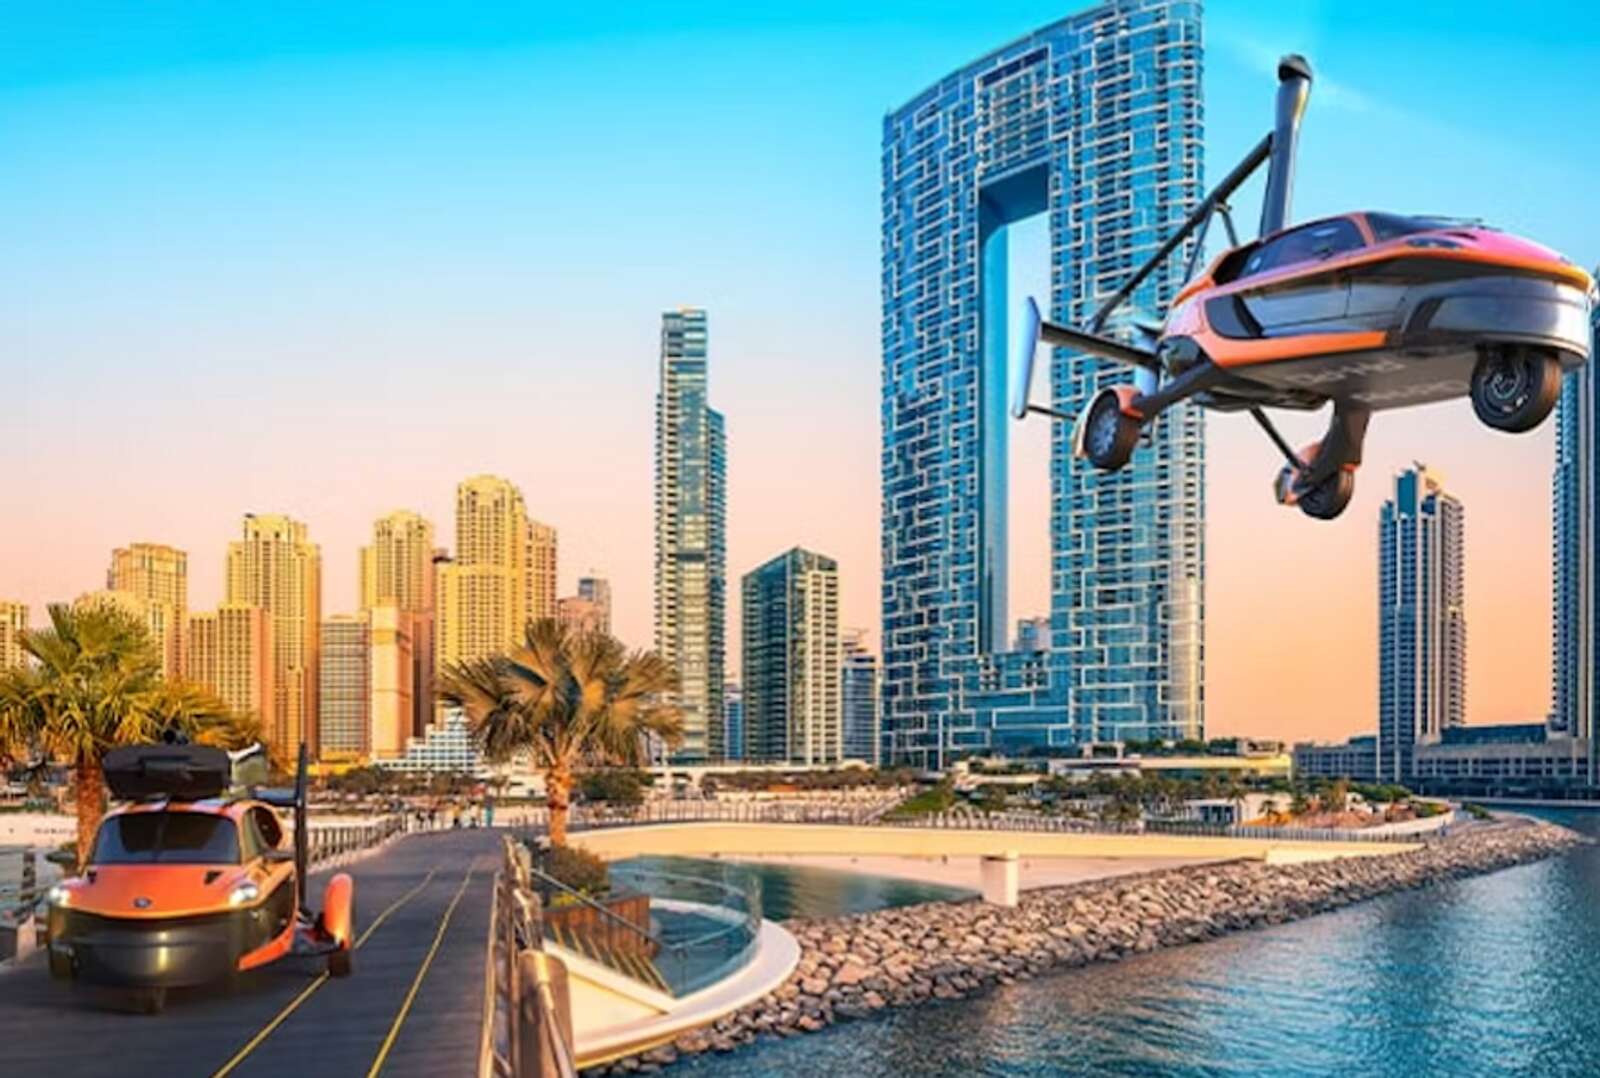 dubai: over 100 flying cars to take residents from door to door cutting travel time